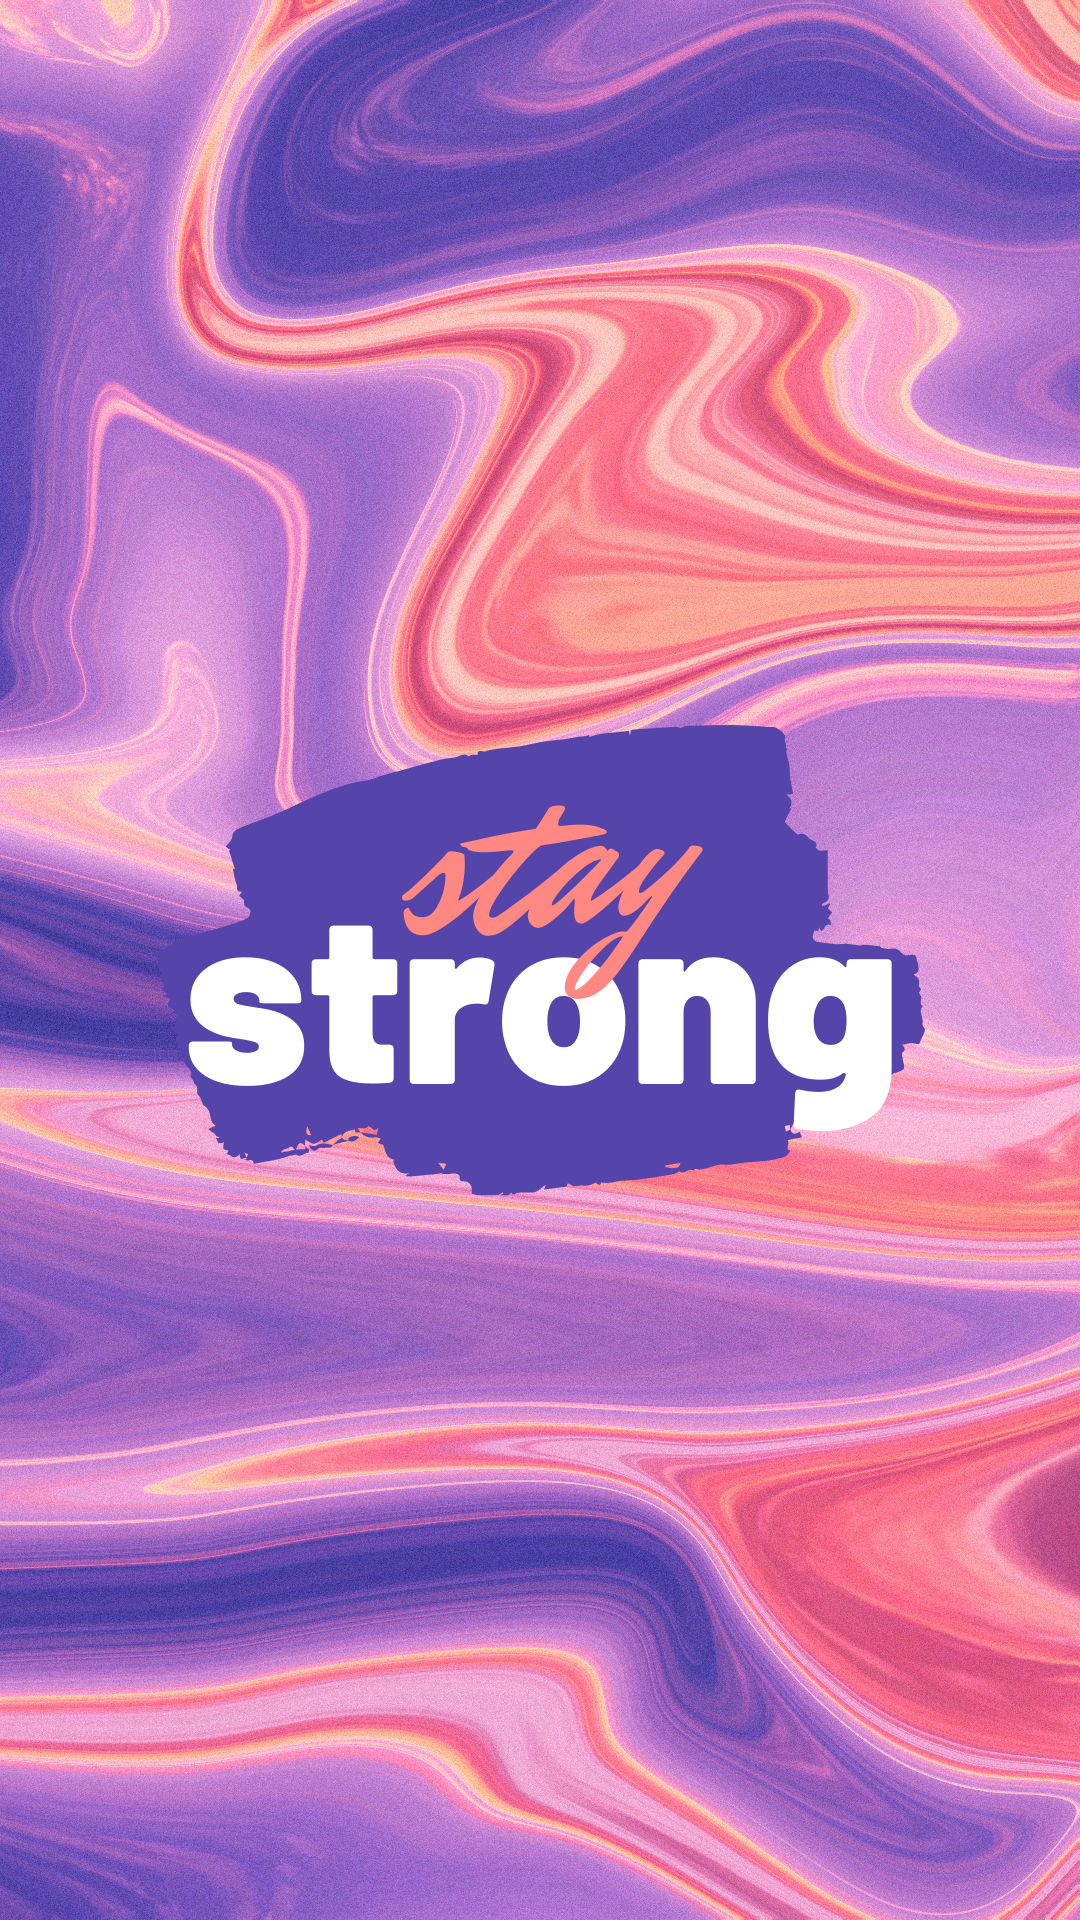 stay strong quote